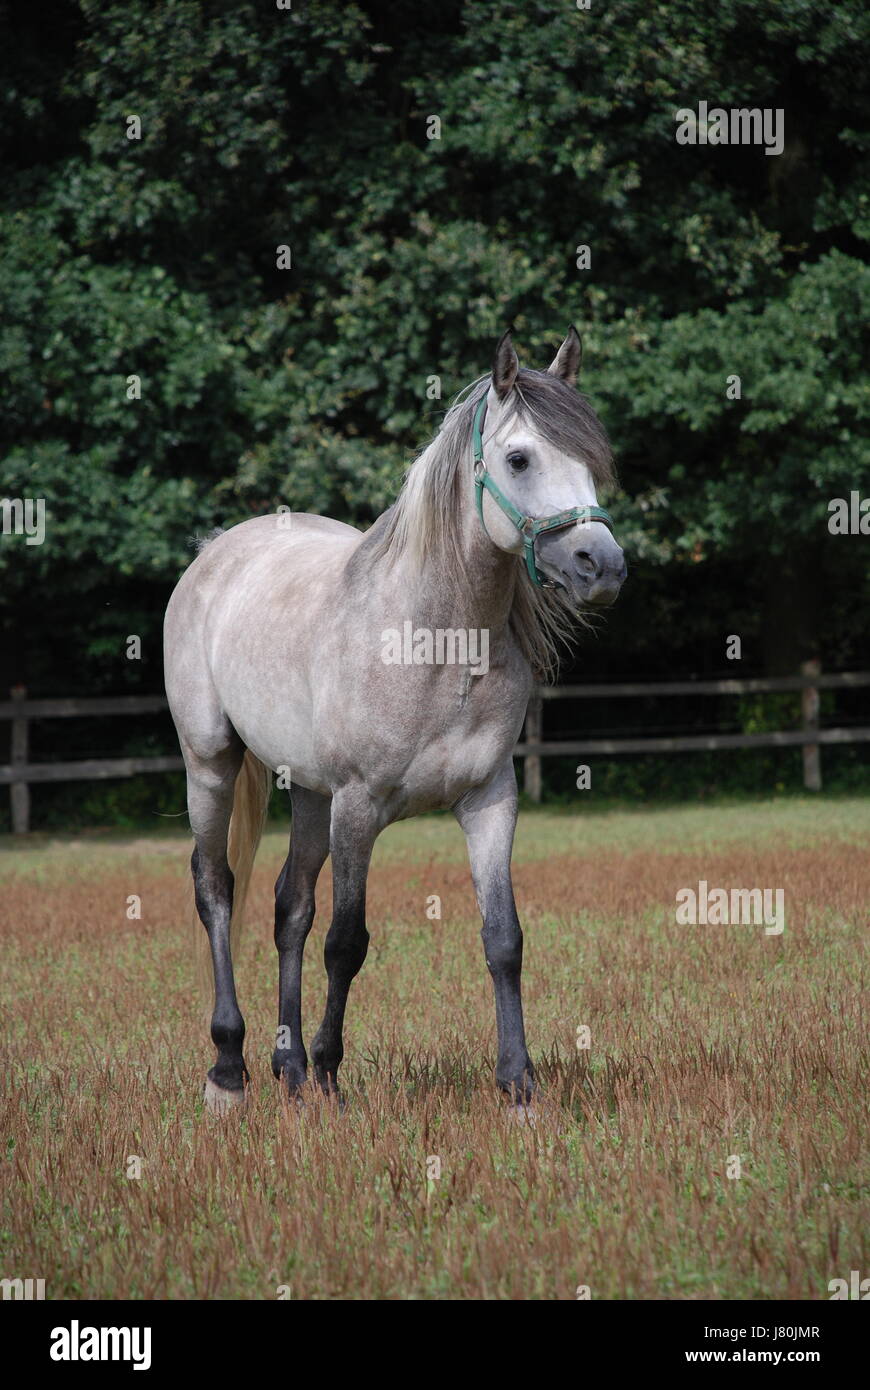 arab dapple grey horse thoroughbred physique willow horse face portrait eyes Stock Photo